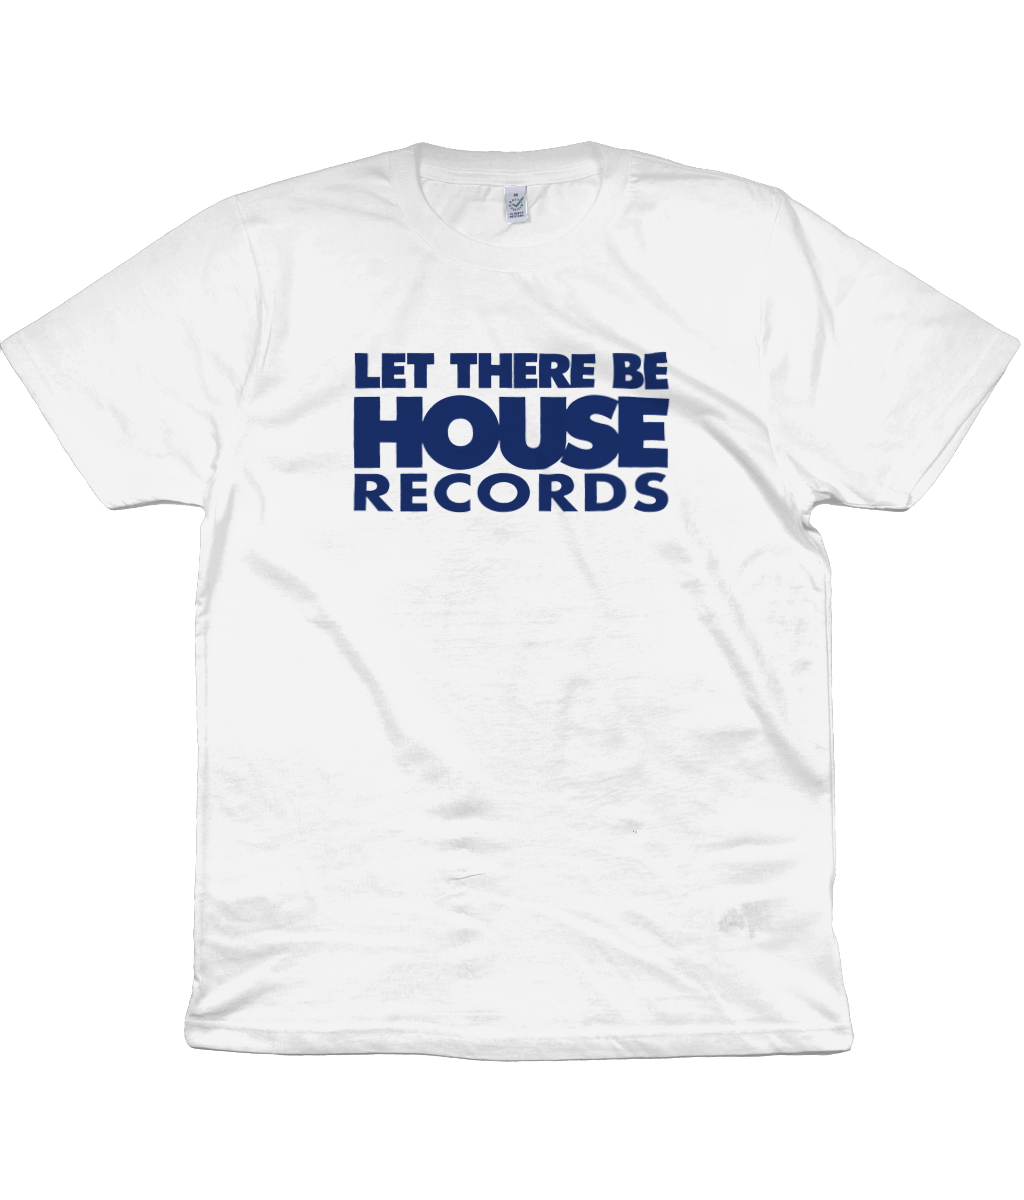 T-Shirt LTBH Records Blue